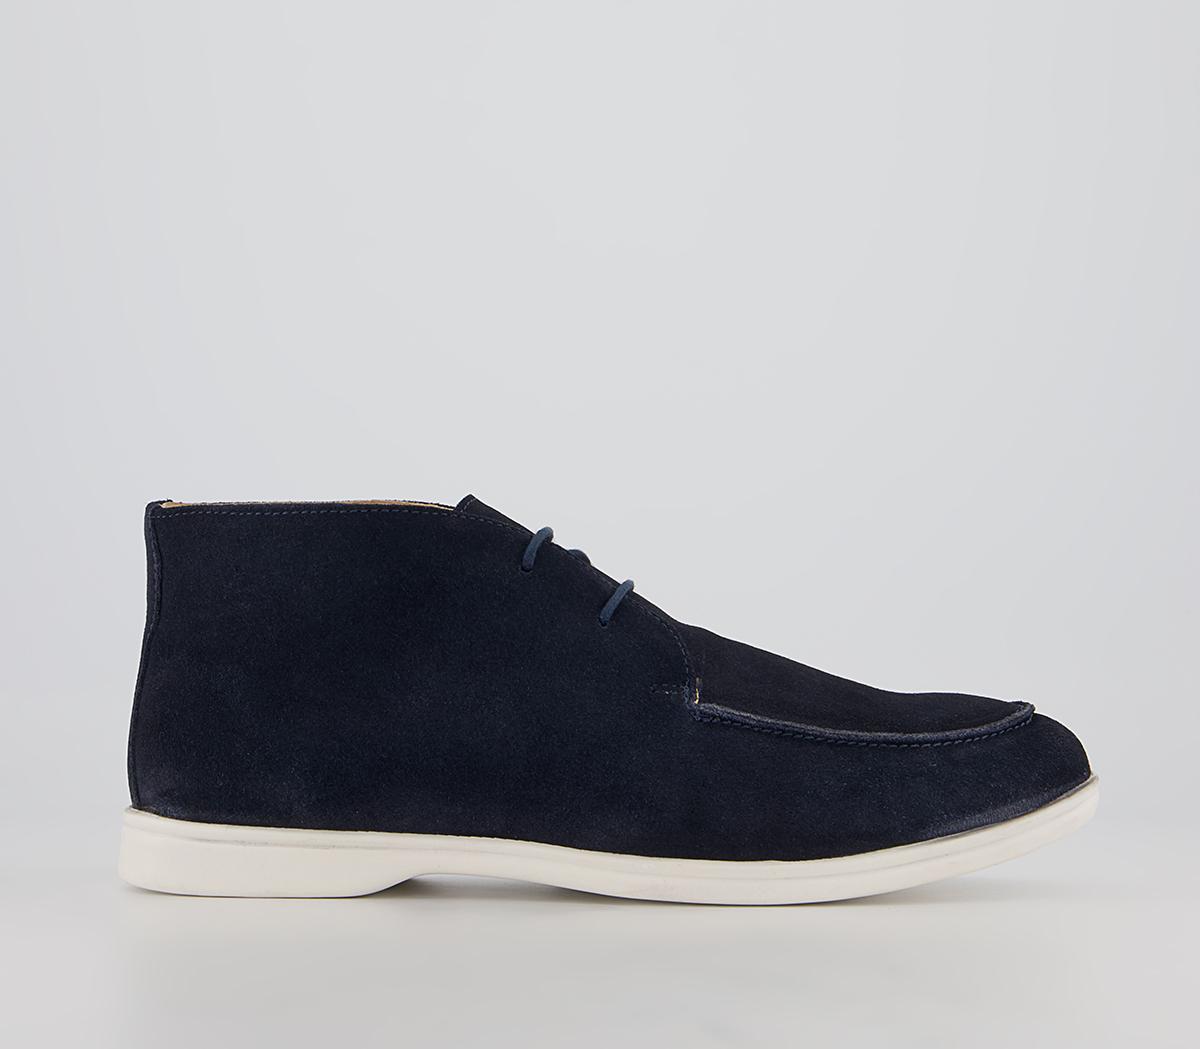 OfficeBarkway Suede Ankle BootsNavy Suede